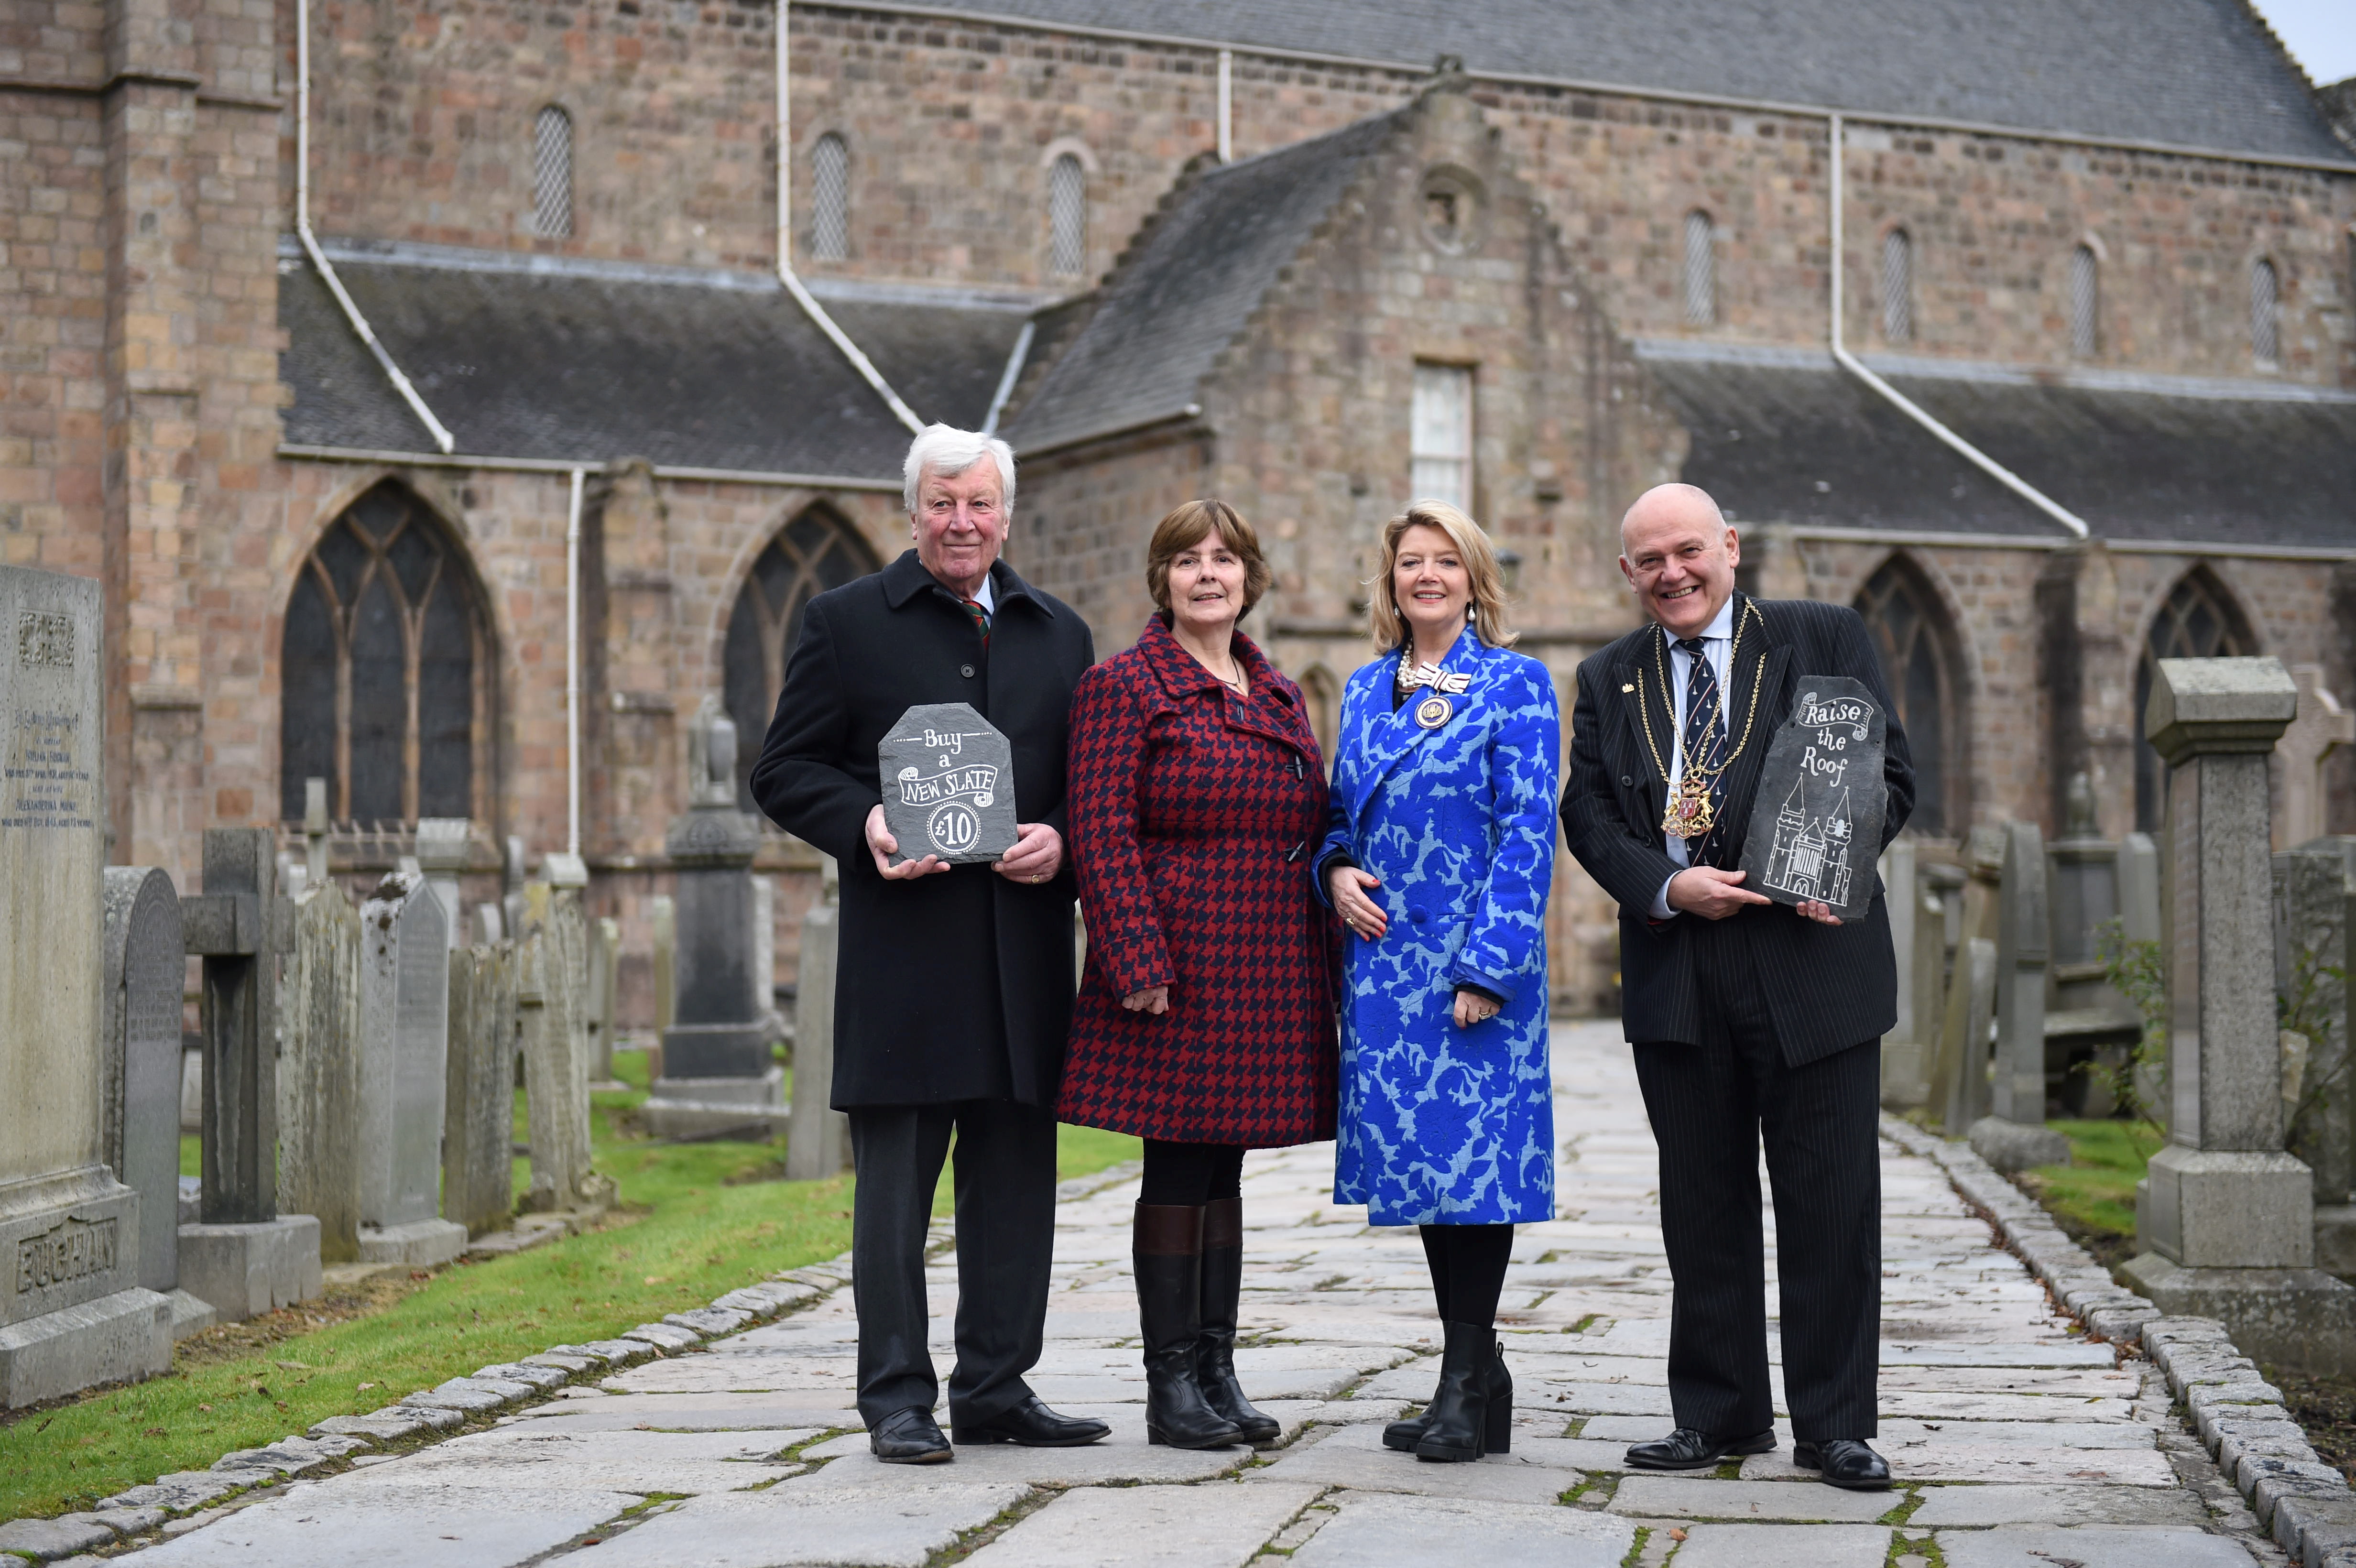 L-R: James Ingleby, lord lieutenant Aberdeenshire, Shona Mutch Co Treasurer and fundraisning campaigner, Fiona Kennedy OBE DL singer and church member and Barney Crockett Lord Provost.